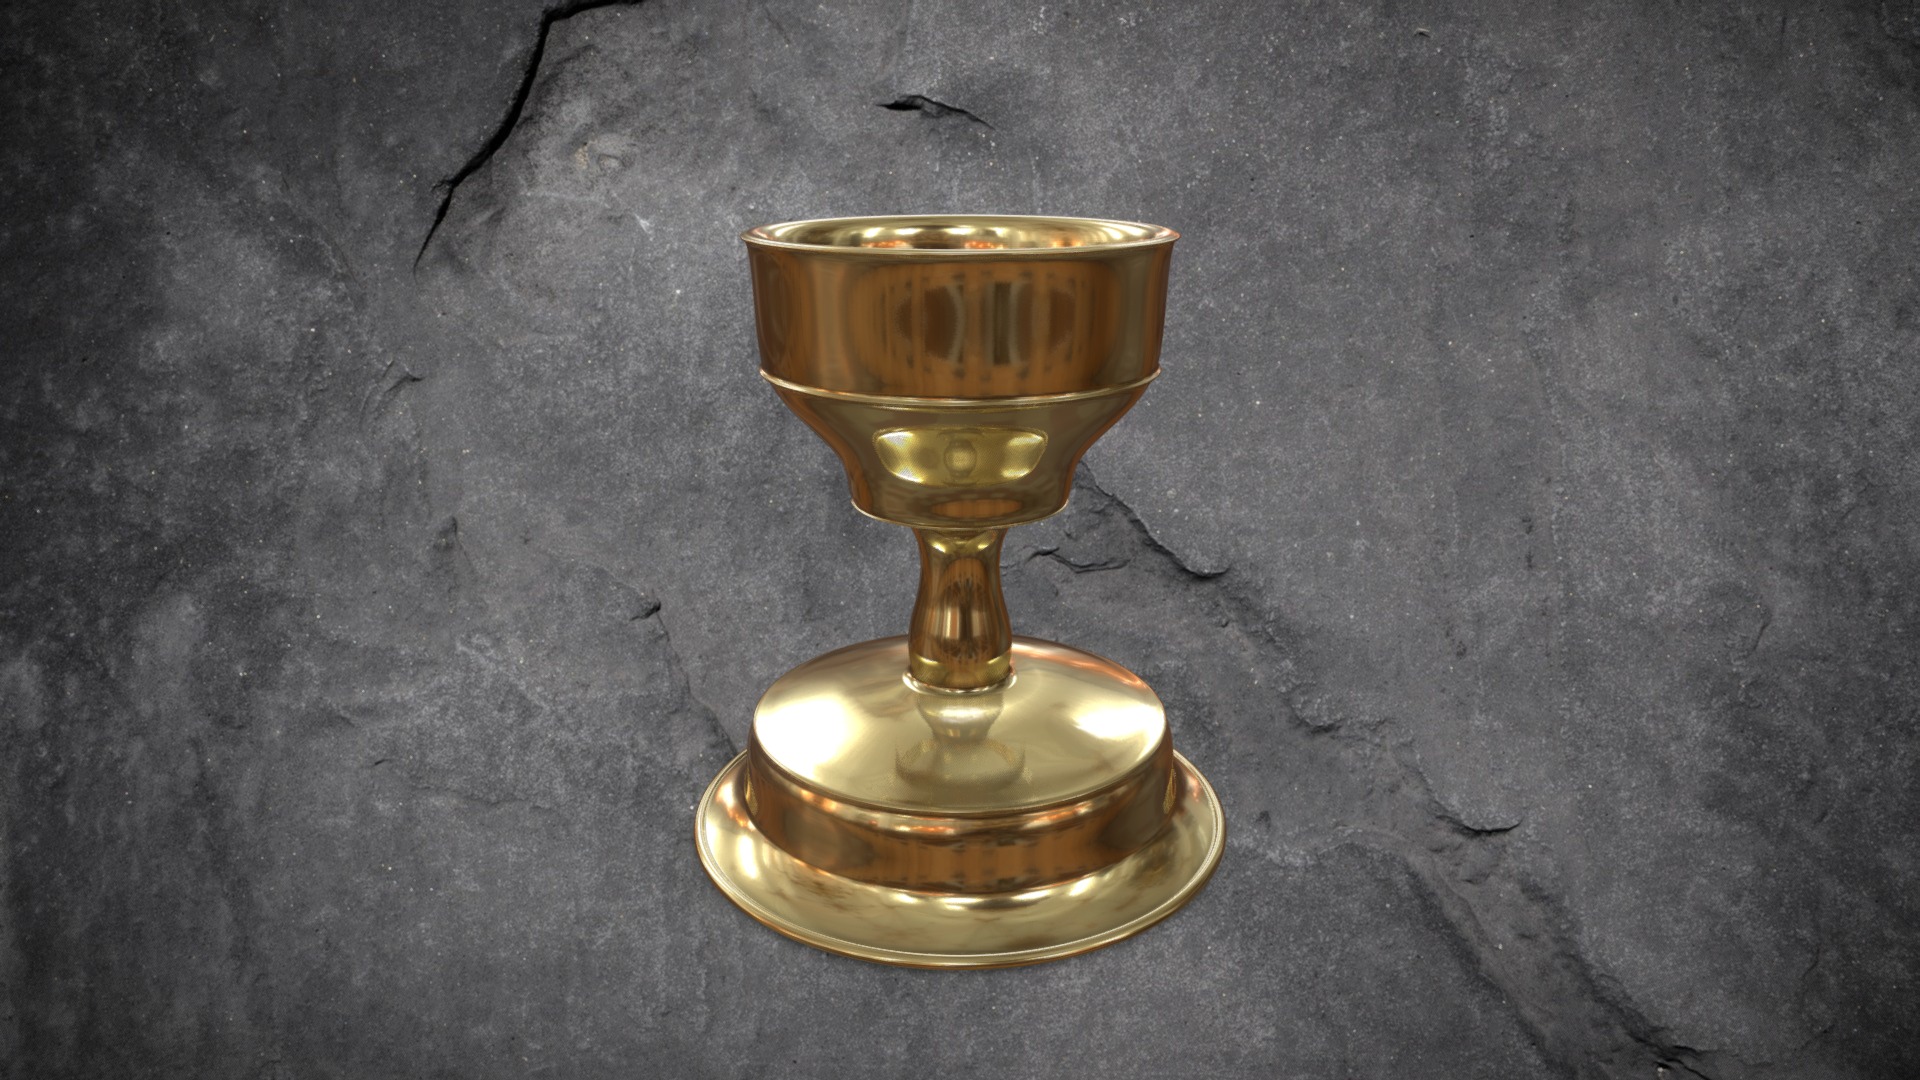 3D model Simple Ornamental Goblet Cup - This is a 3D model of the Simple Ornamental Goblet Cup. The 3D model is about a glass candle holder.